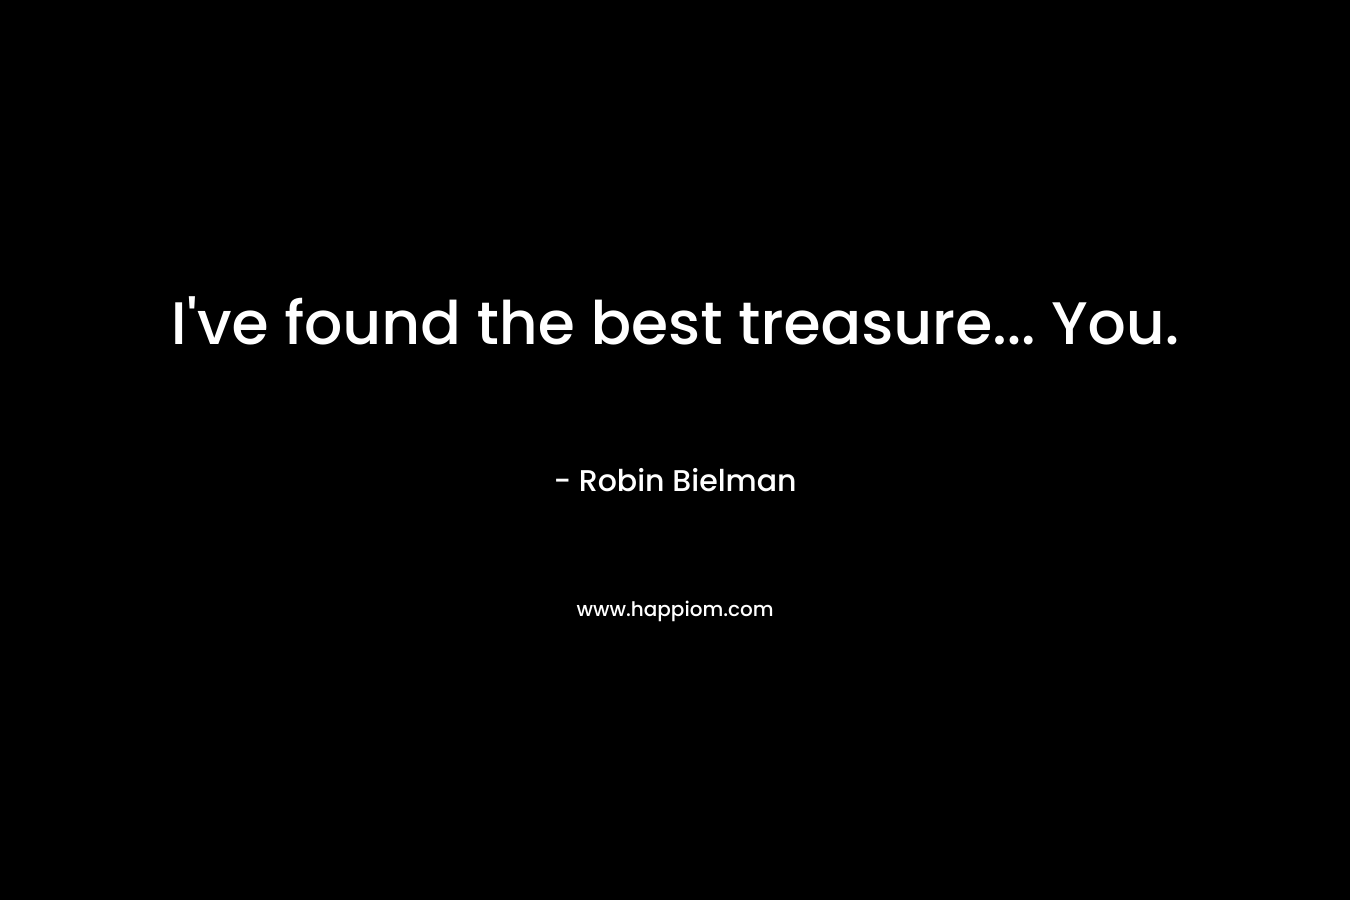 I've found the best treasure... You.